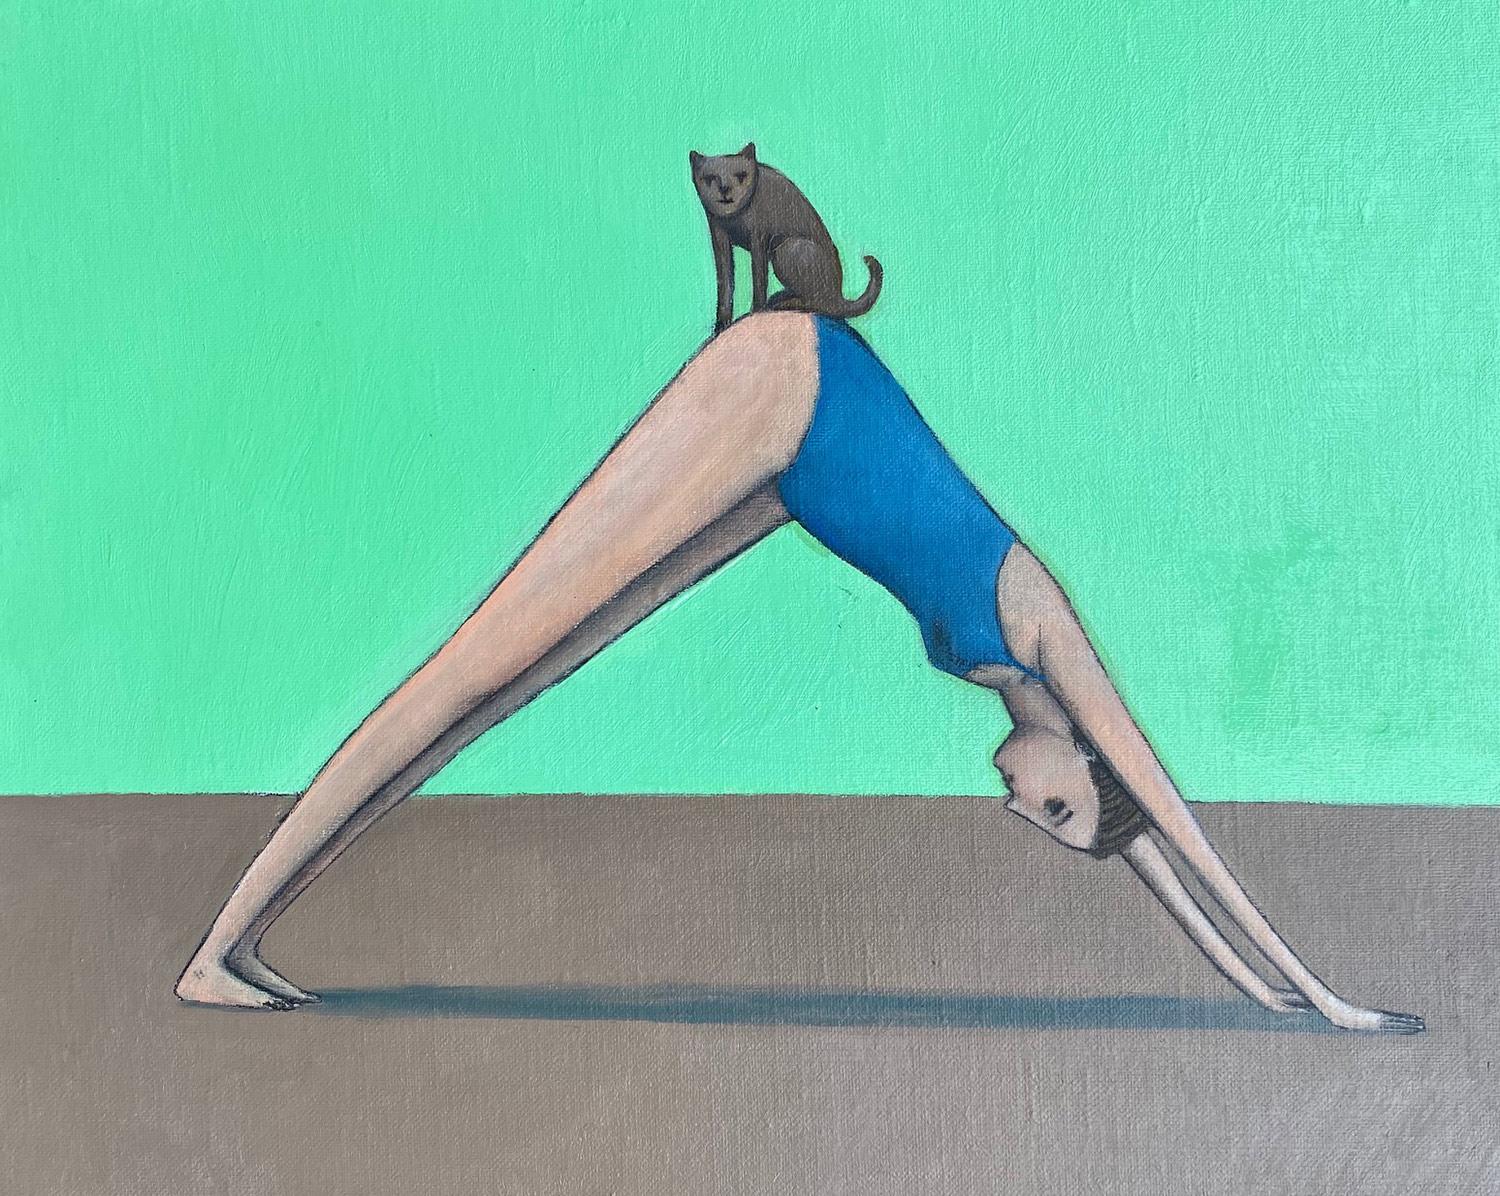 Giacomo Piussi Animal Painting - Yoga Girl With Cat, Florence, Italy, 2021